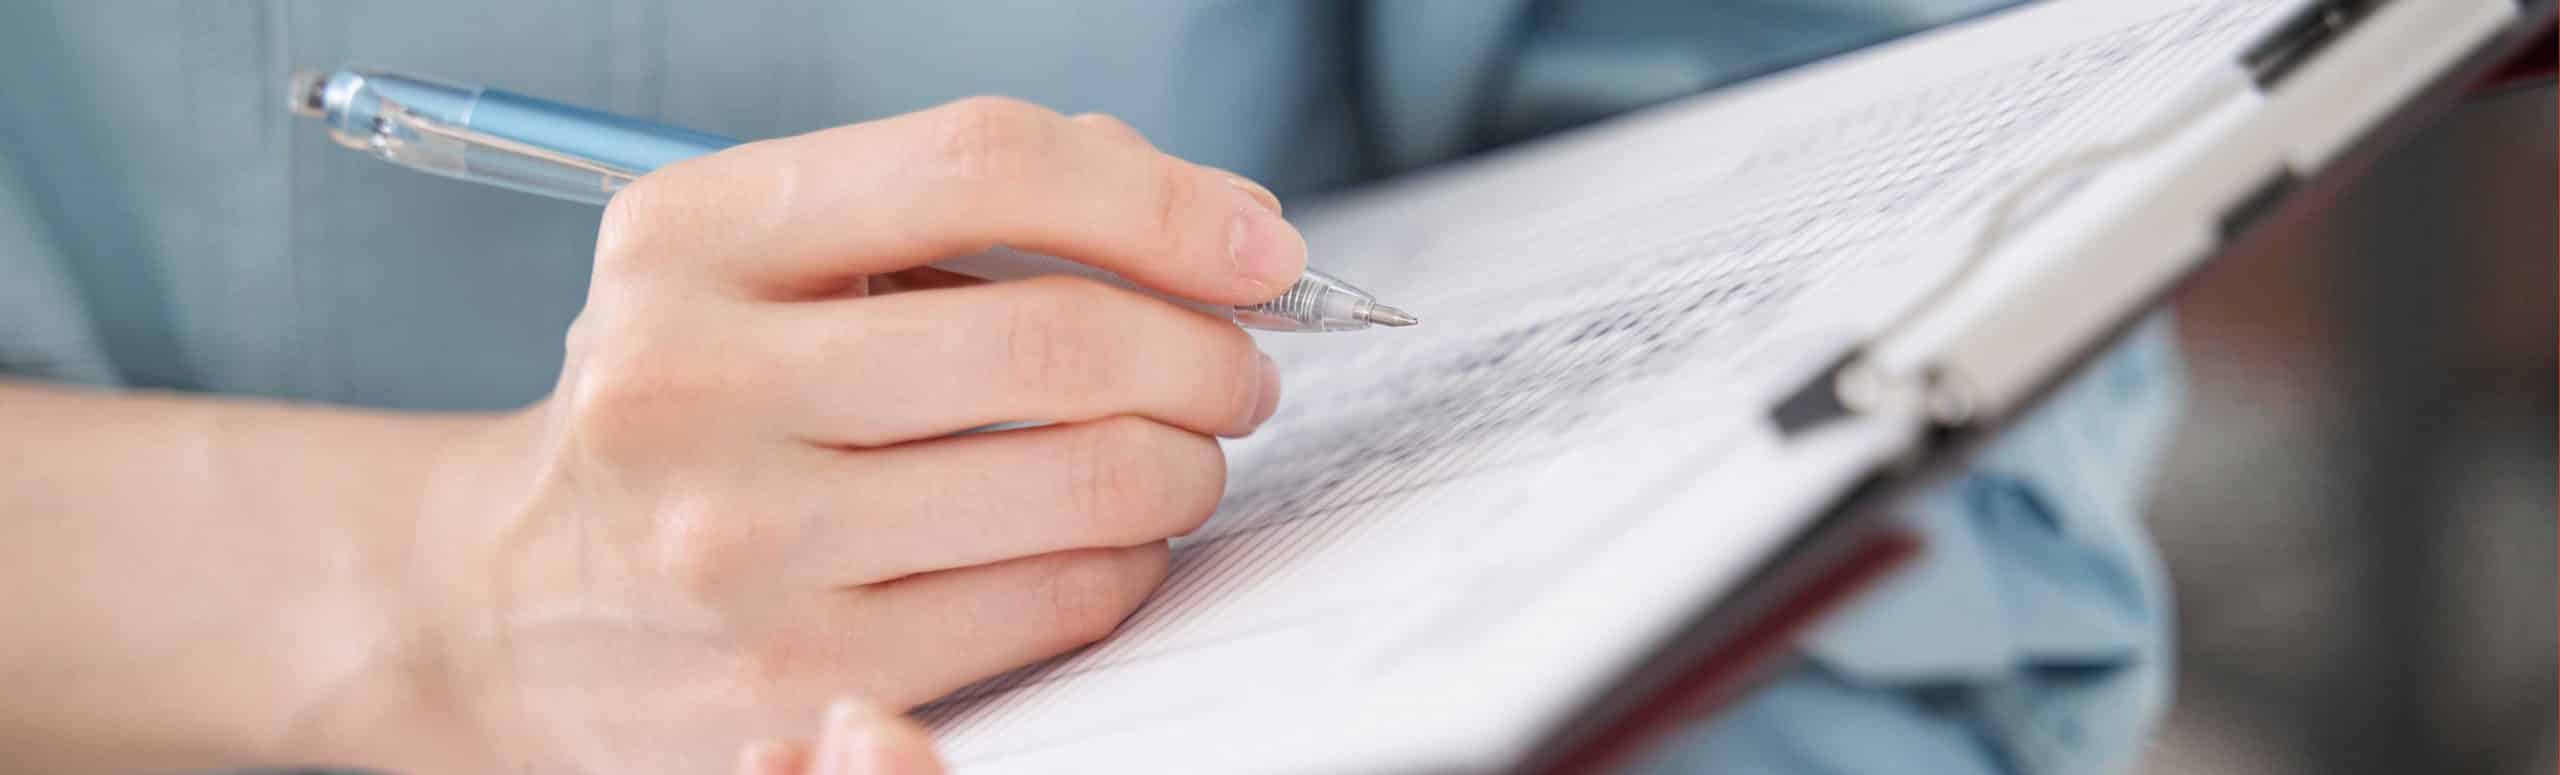 Righthand holding a pen writing on paper attached to clipboard